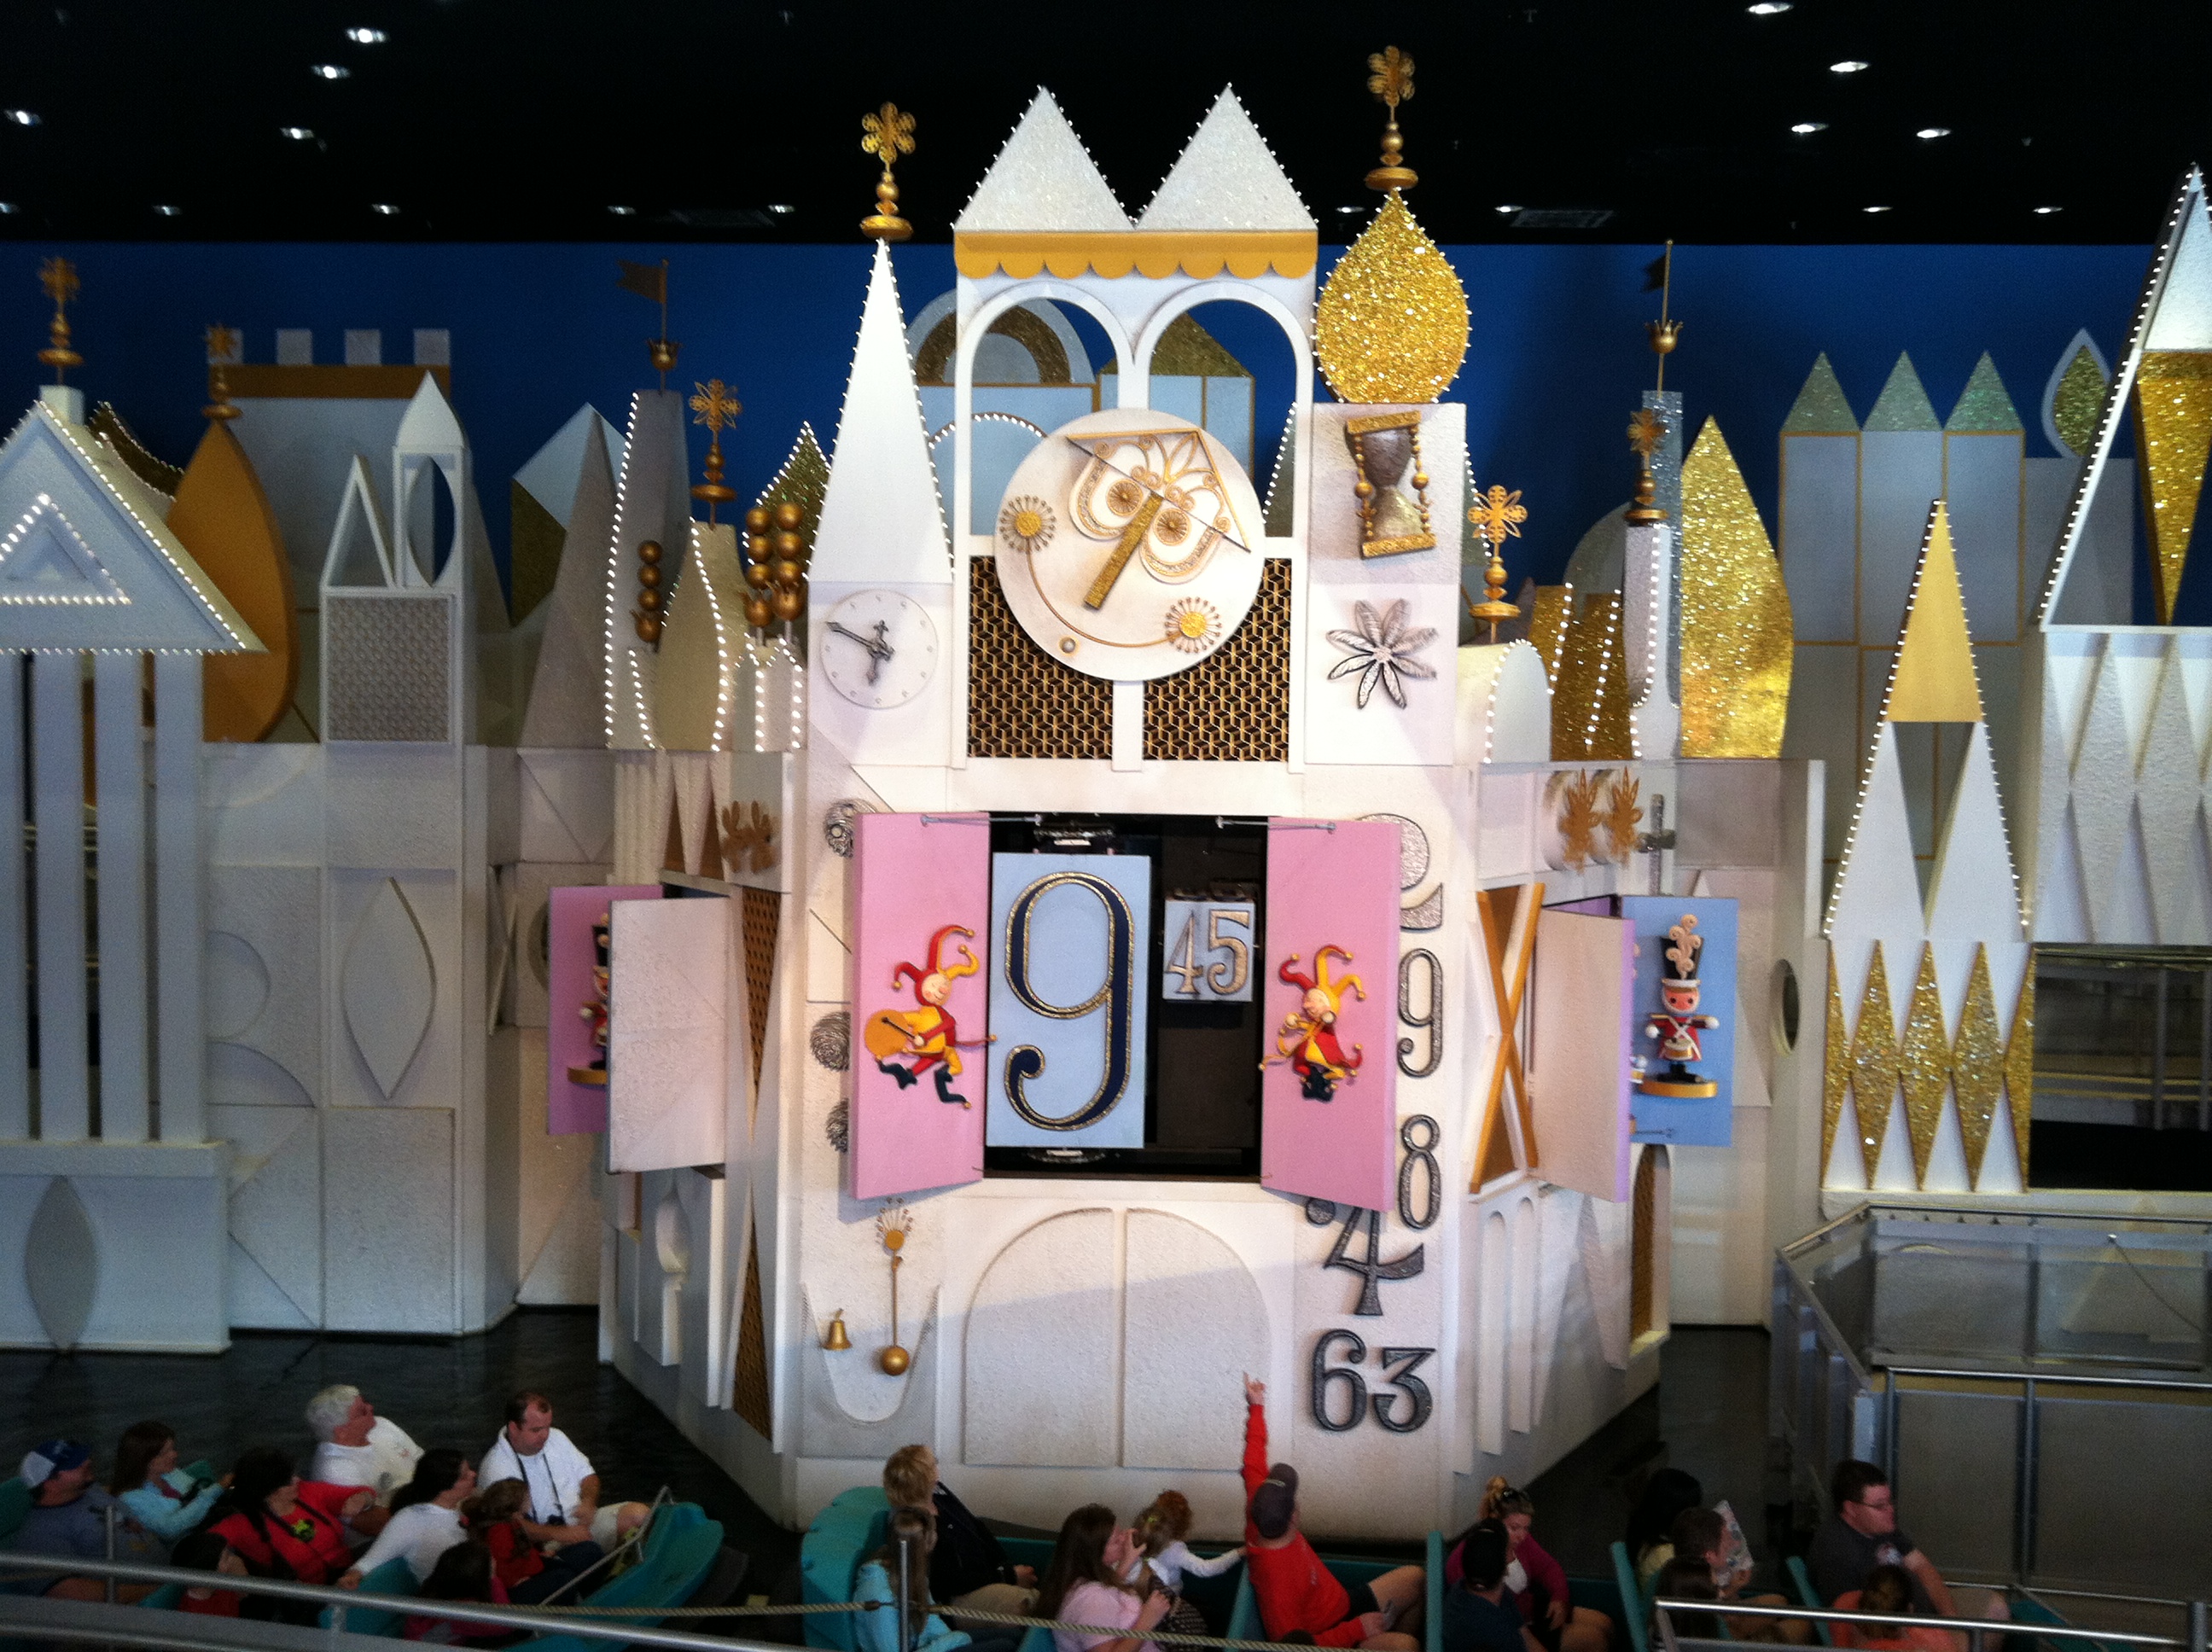 It's a small world clock tower toy.